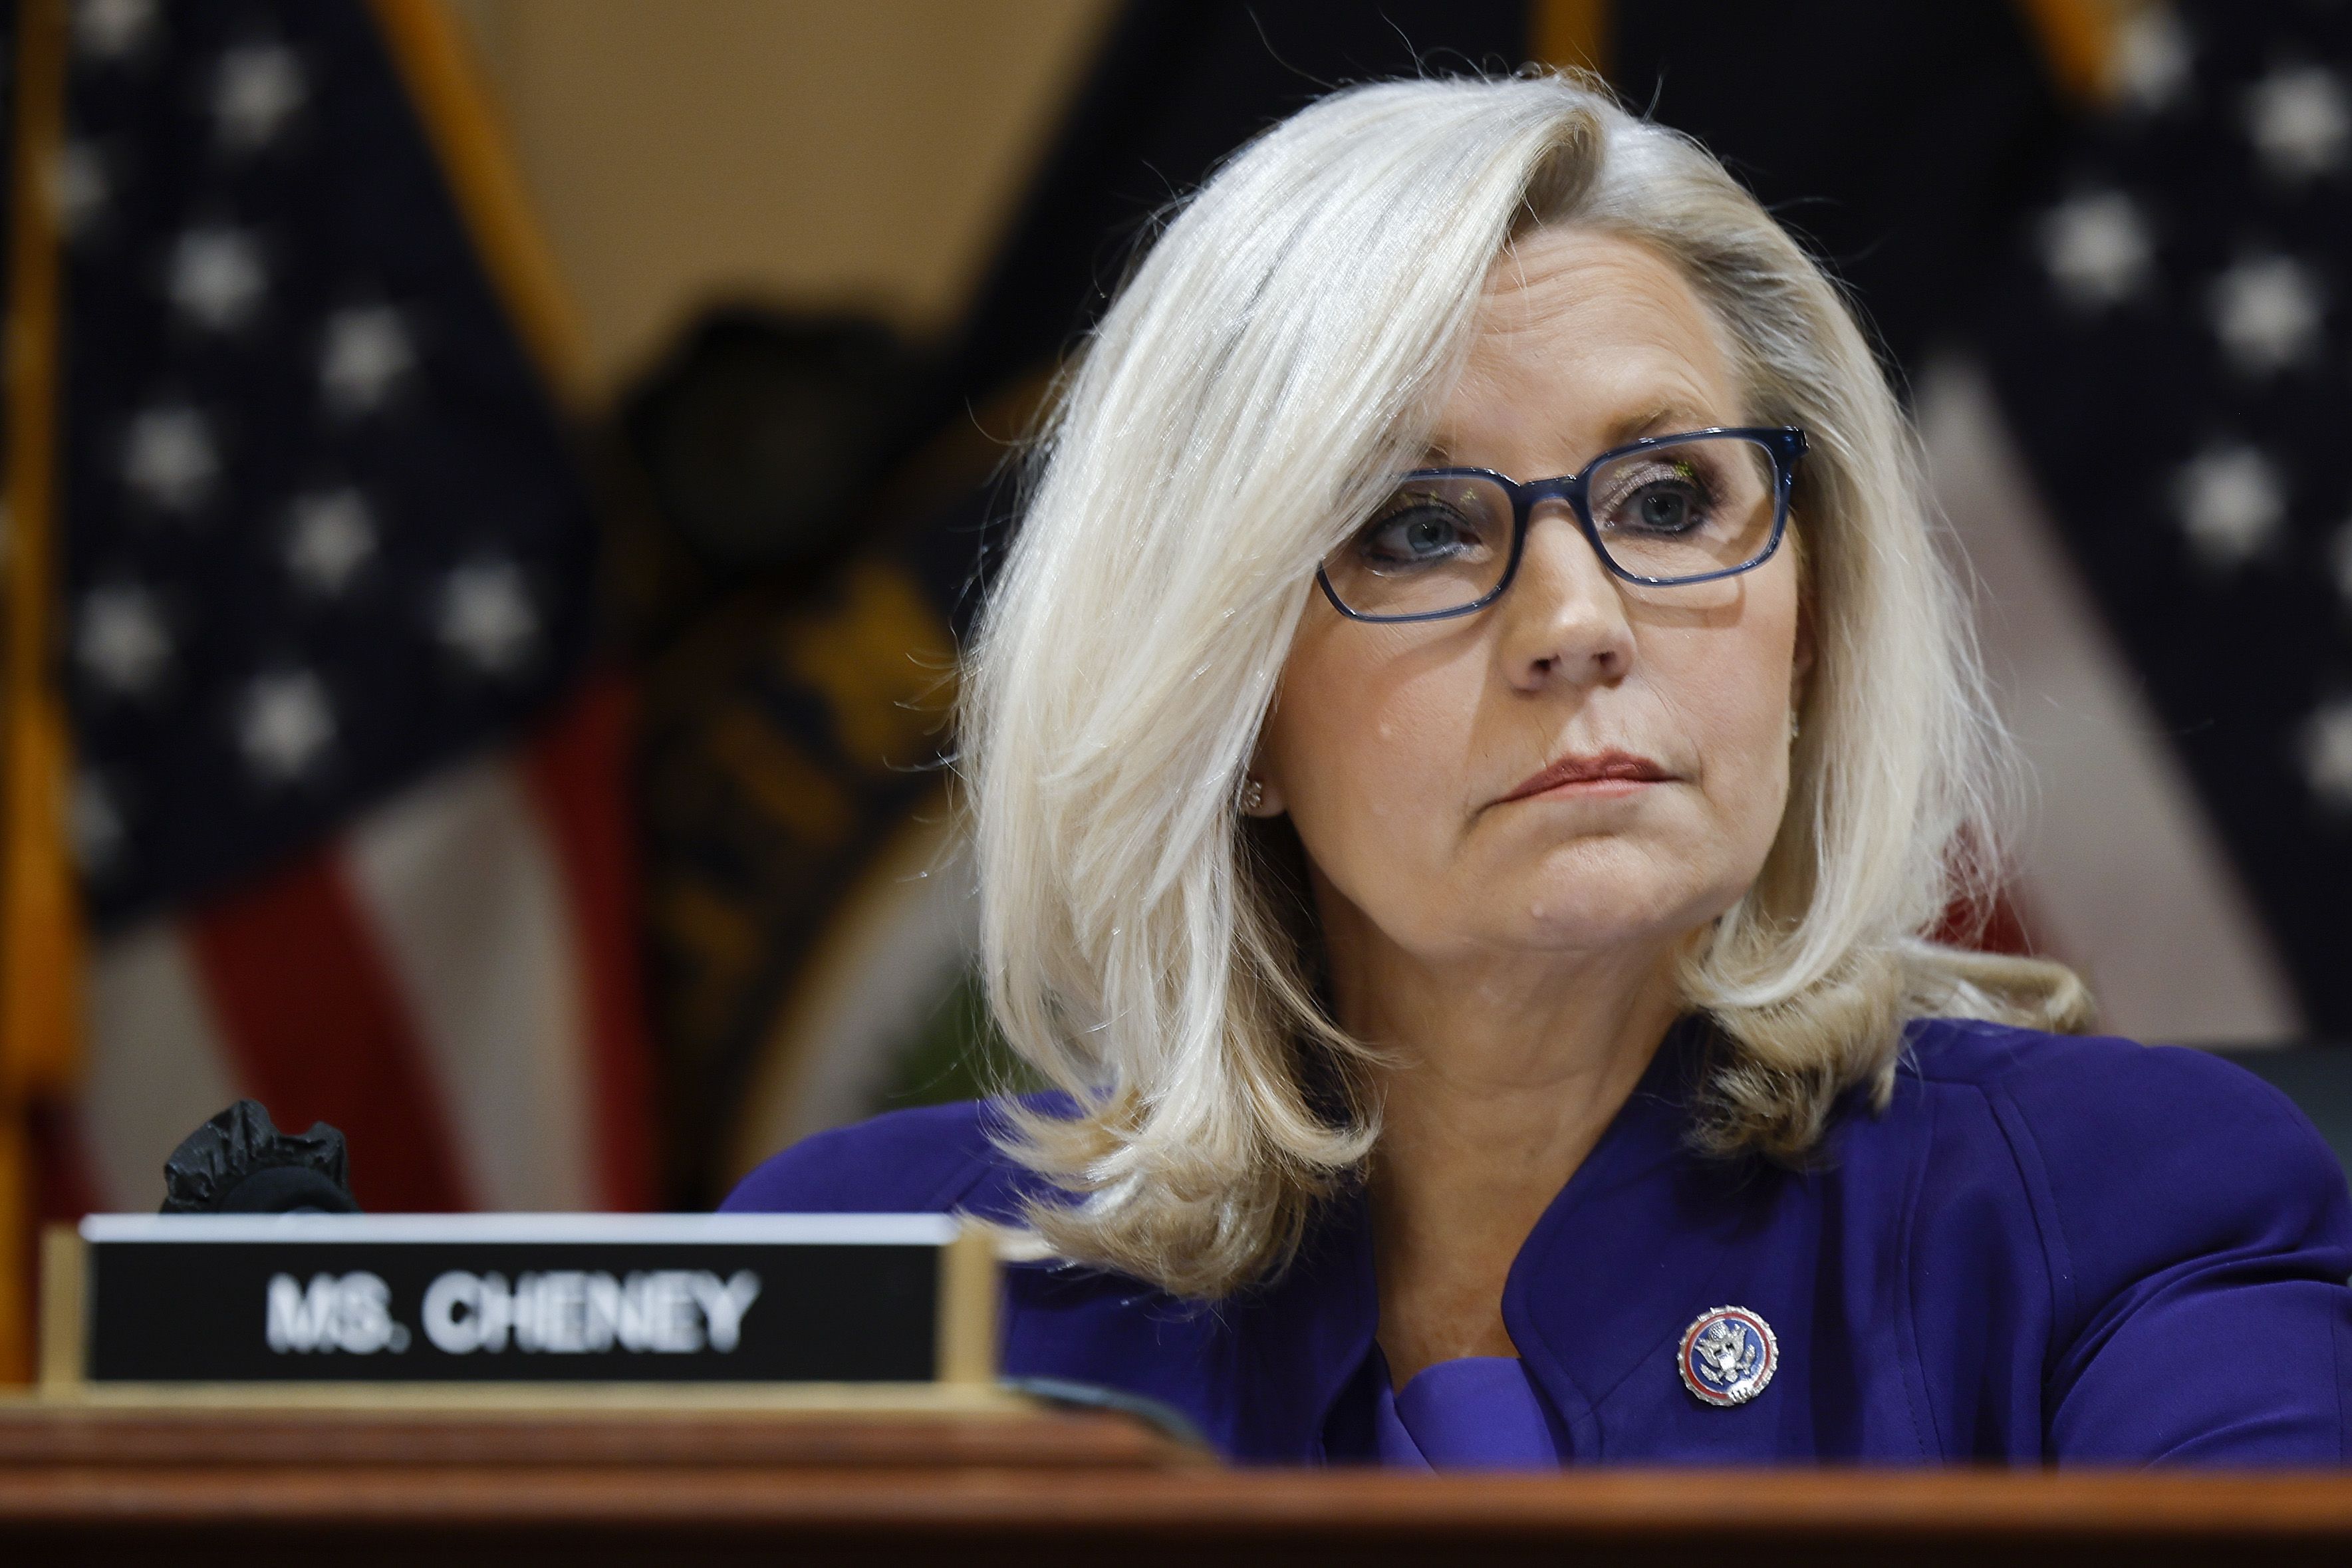 Liz Cheney’s new book blasts Capitol Hill Republicans and party leaders as ‘enablers and collaborators’ of Trump – whom one member called ‘Orange Jesus’ (cnn.com)